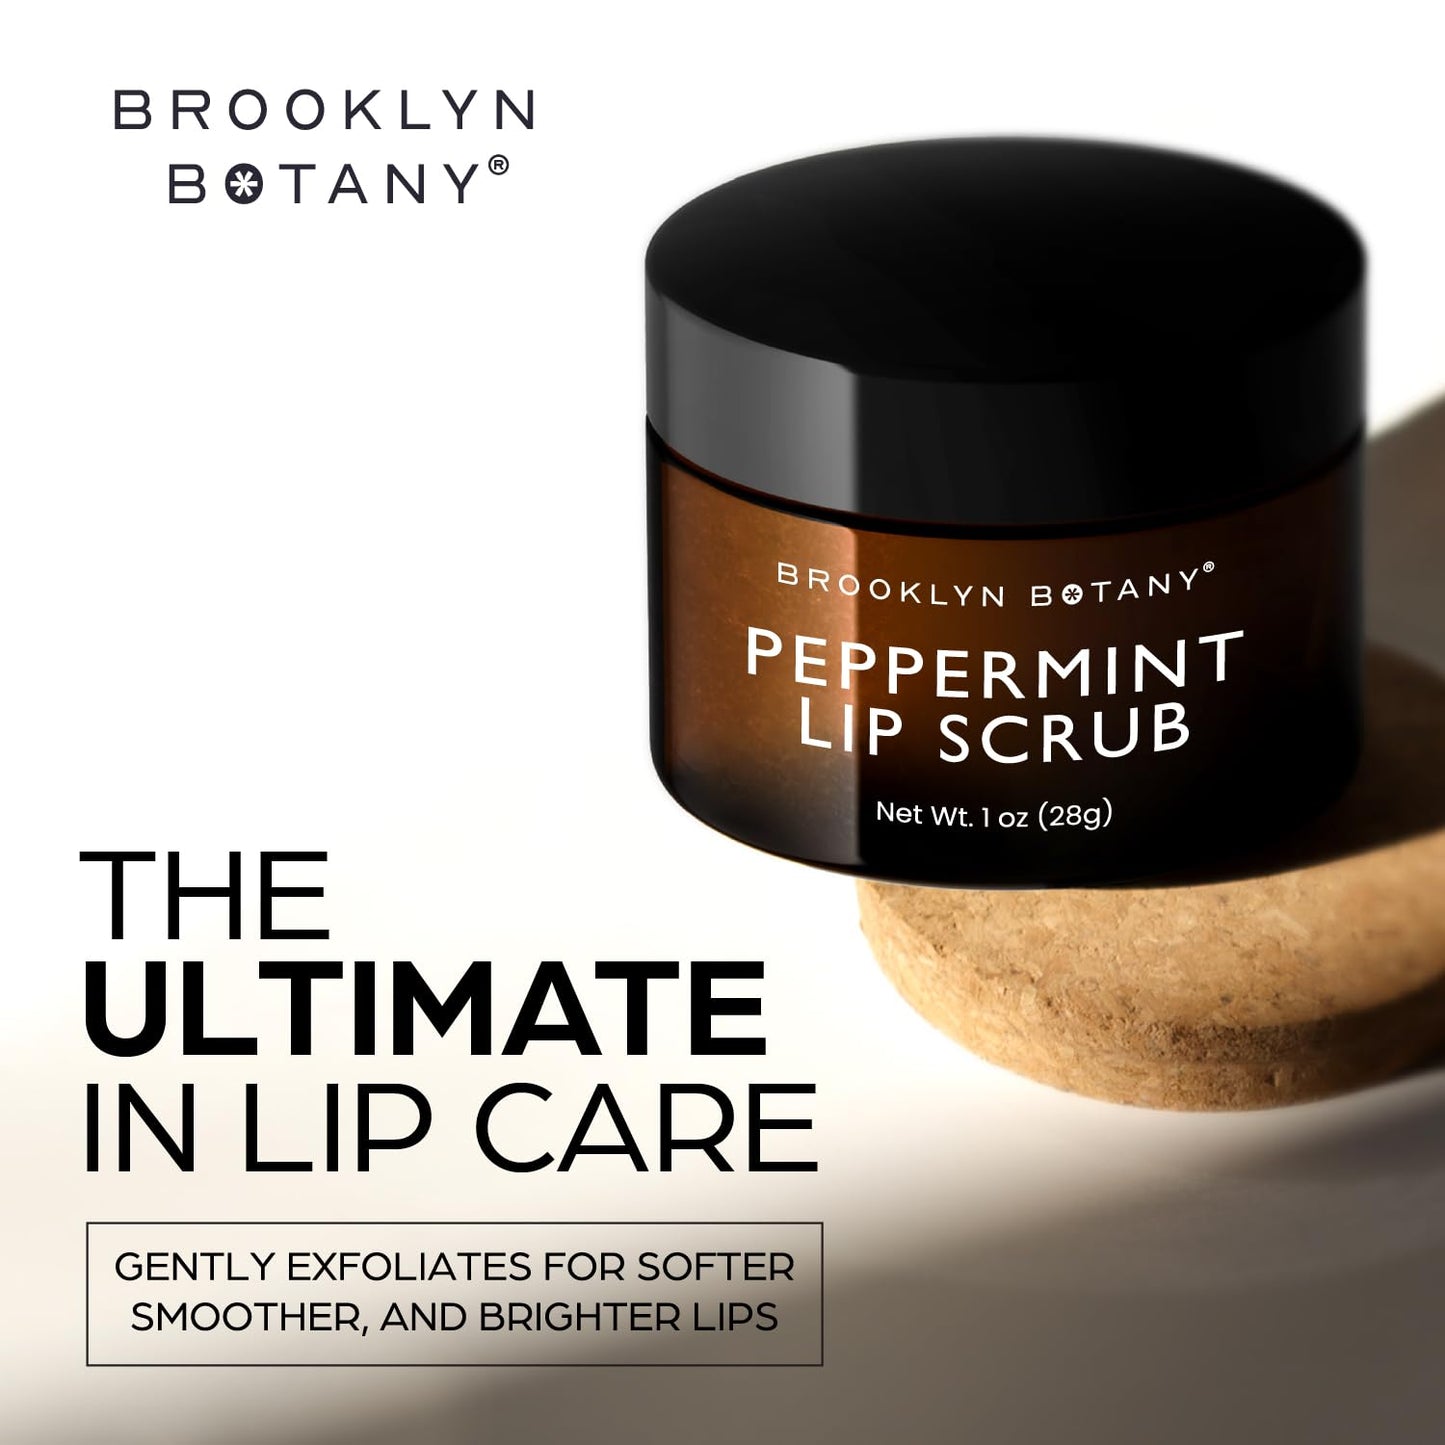 Brooklyn Botany Lip Scrub Exfoliator 1 oz: Peppermint-Flavored Lip Moisturizer for Dry and Chapped Lips - Gentle Exfoliation for Smooth and Brighter Lips